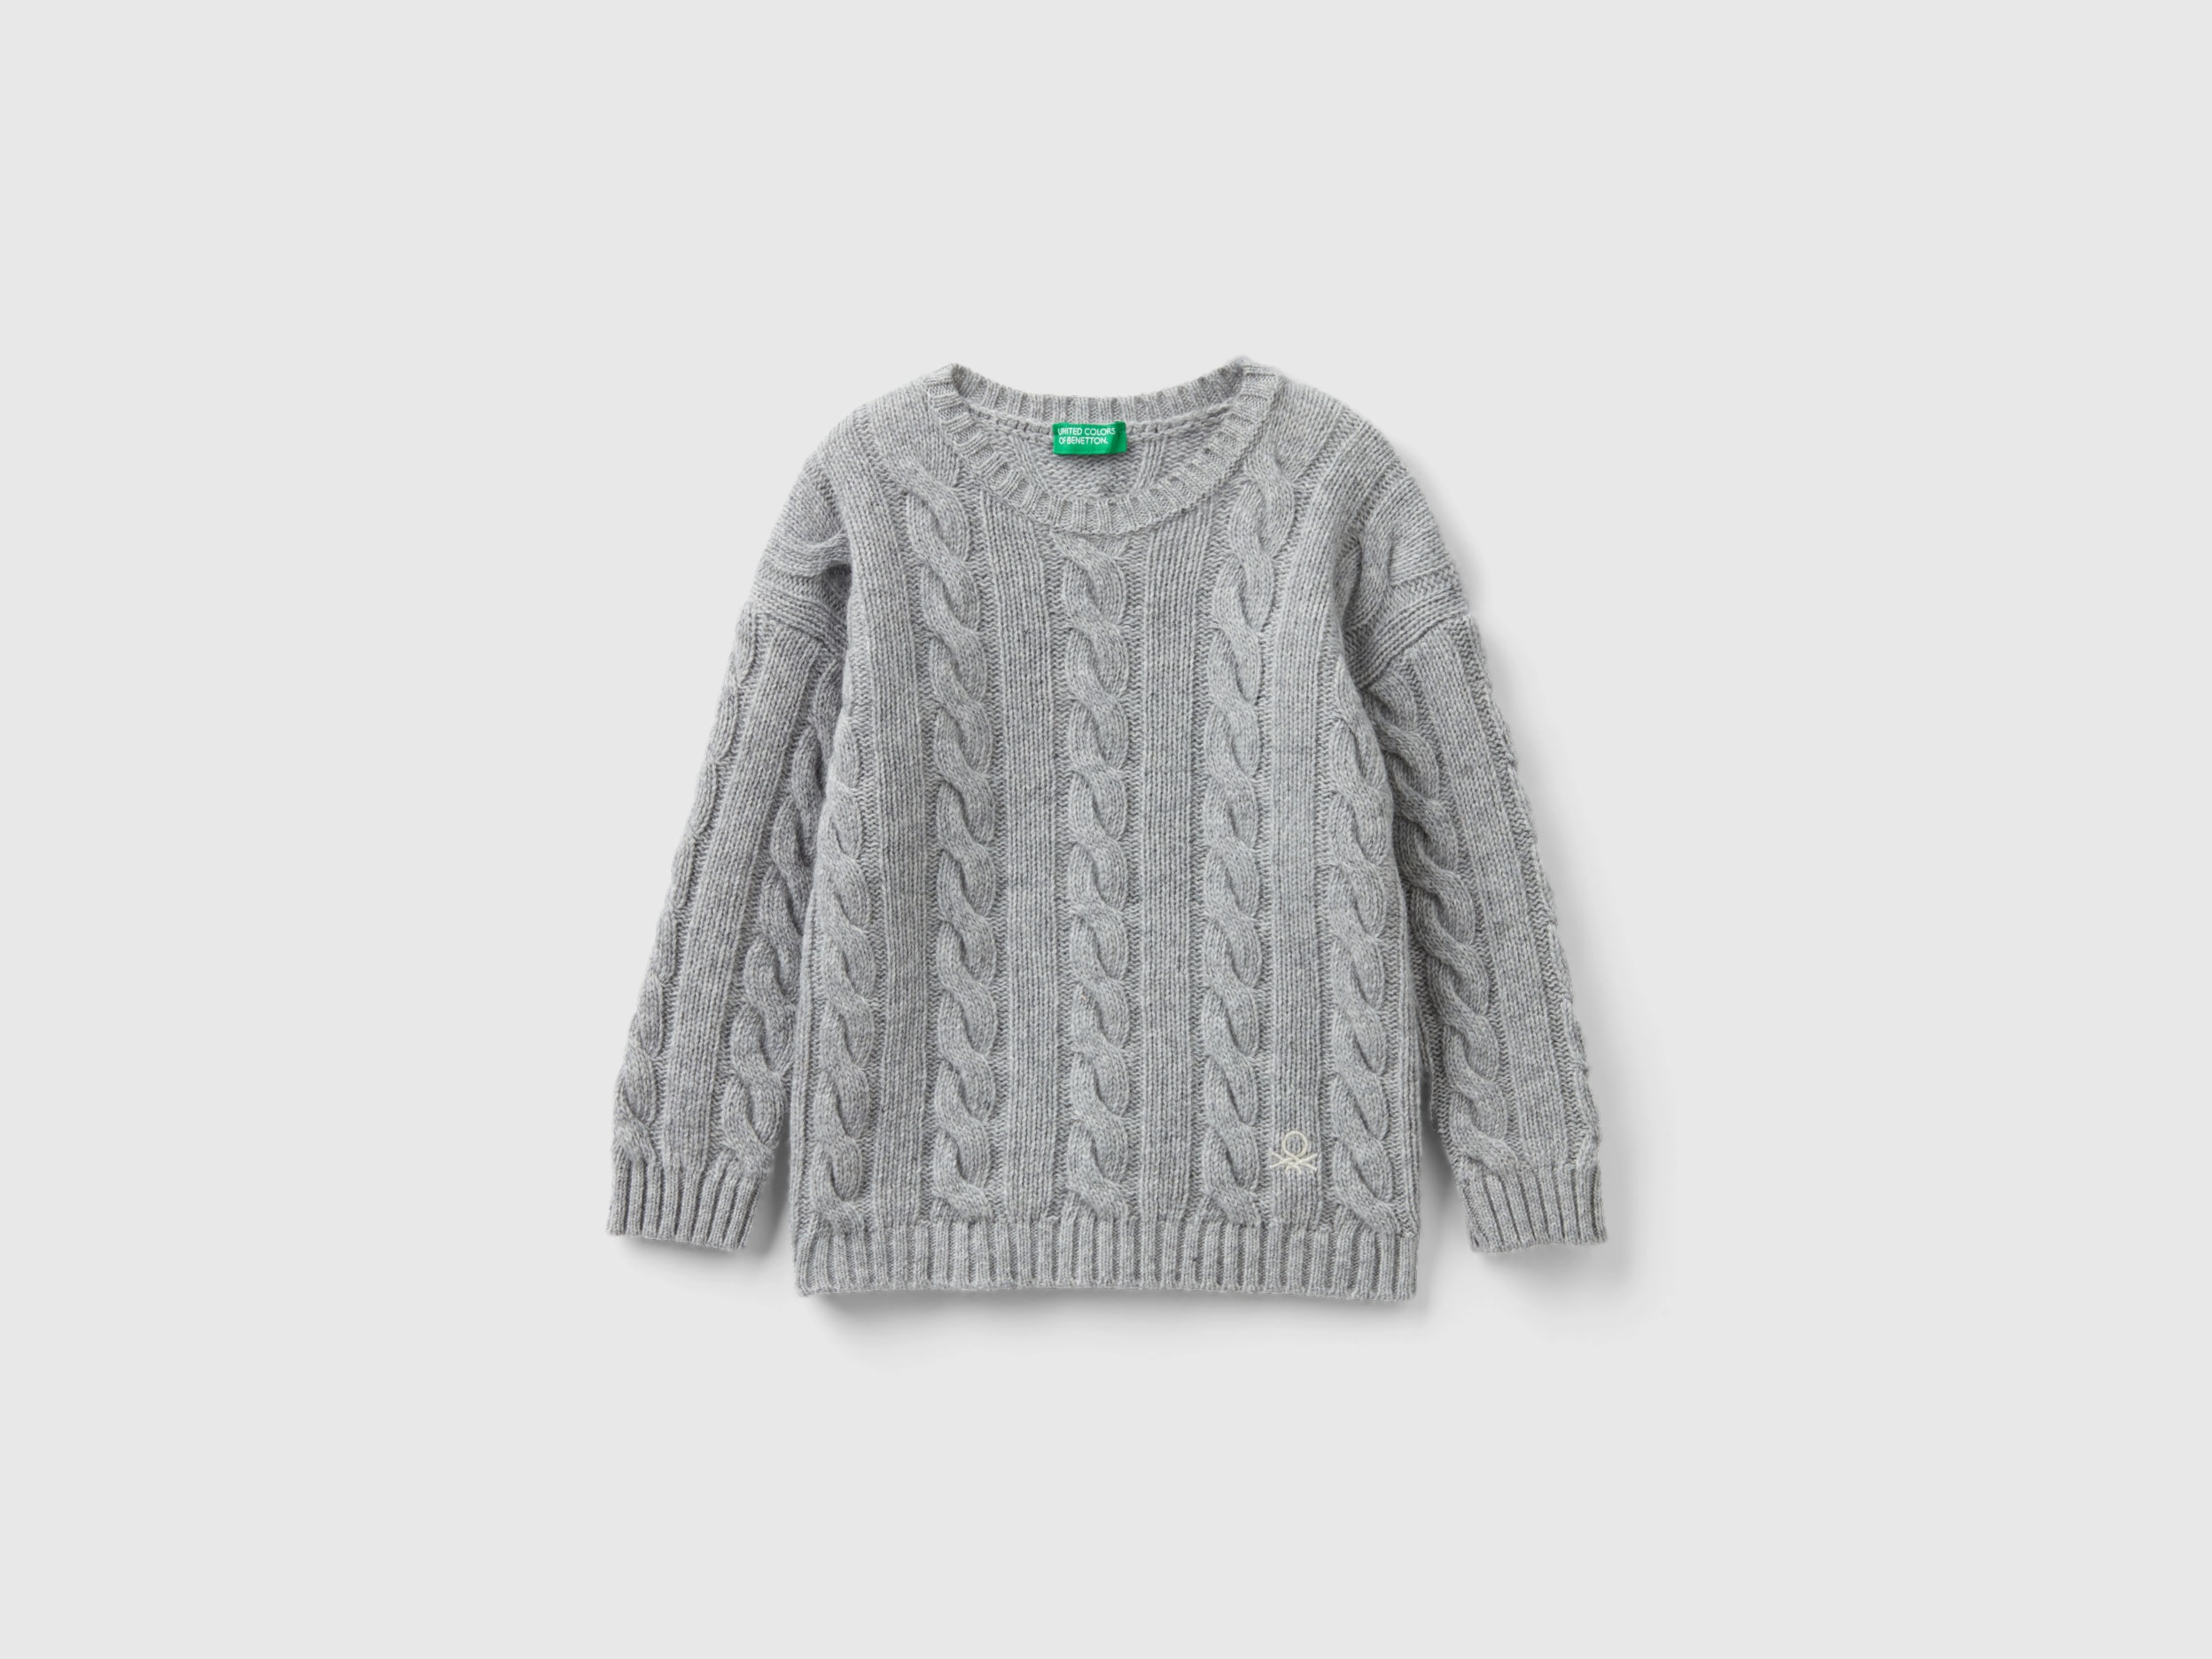 Benetton, Cable Knit Sweater In Wool Blend, size 3-4, Gray, Kids